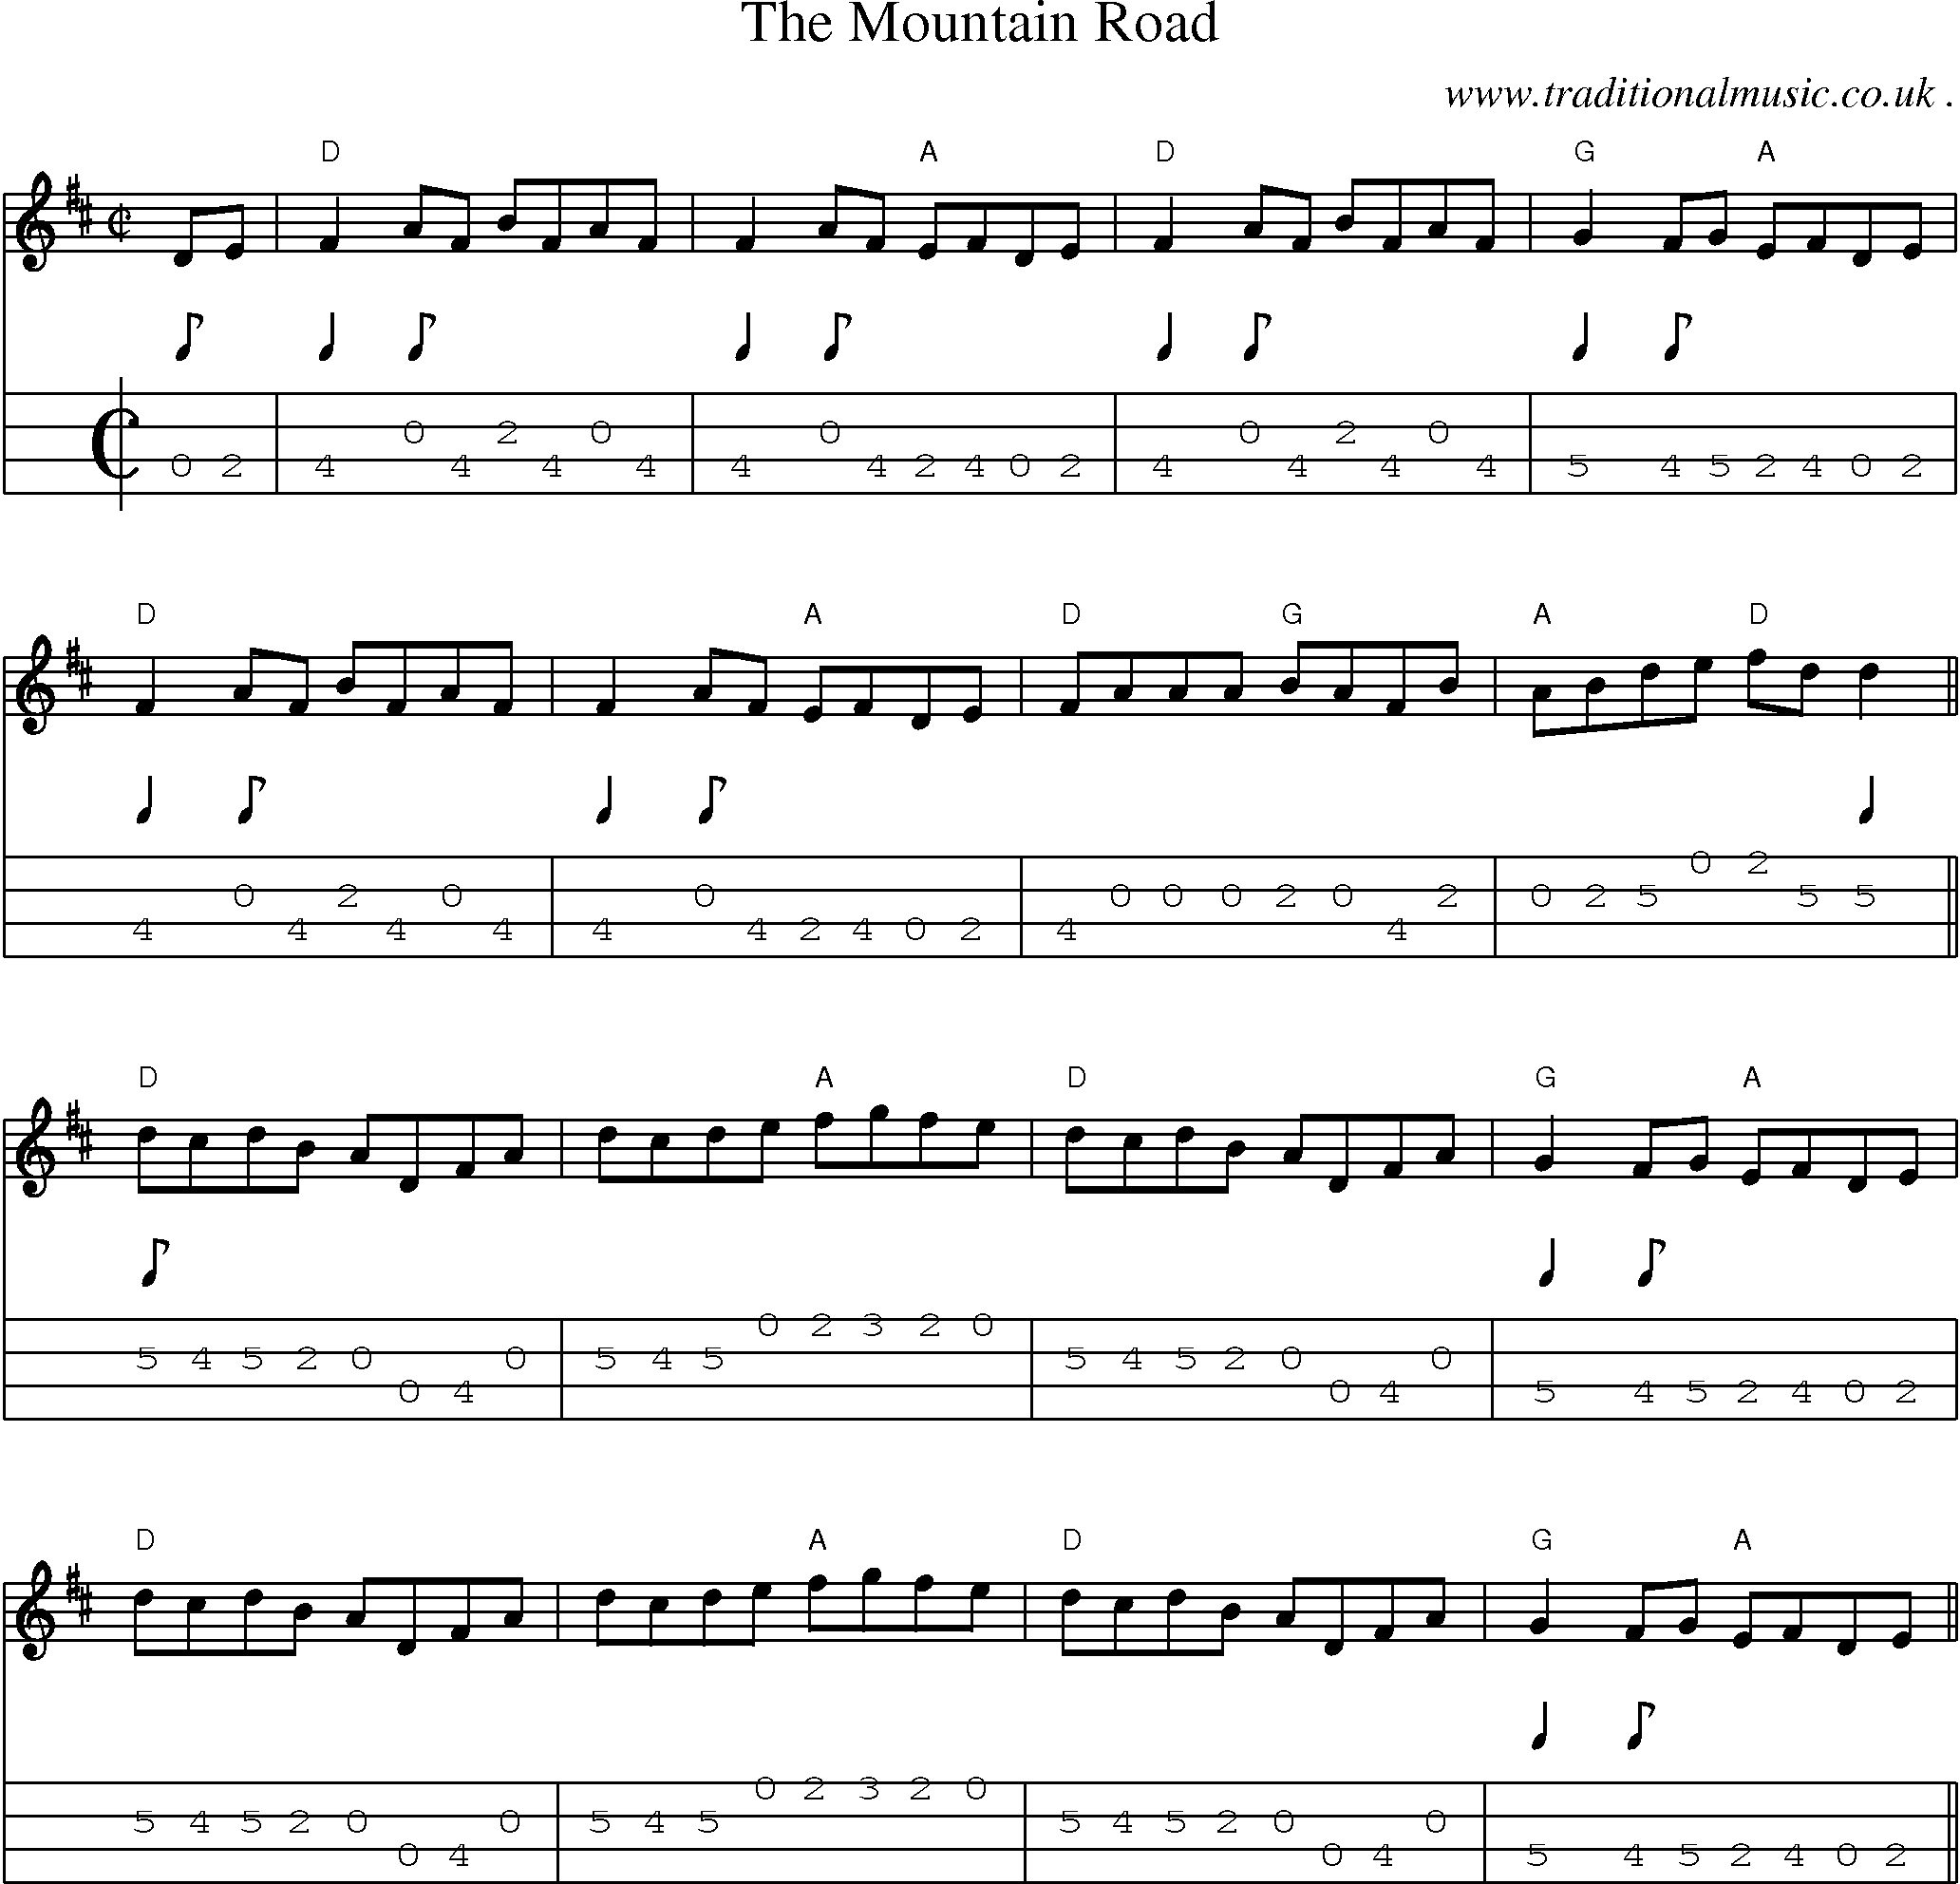 Music Score and Guitar Tabs for The Mountain Road